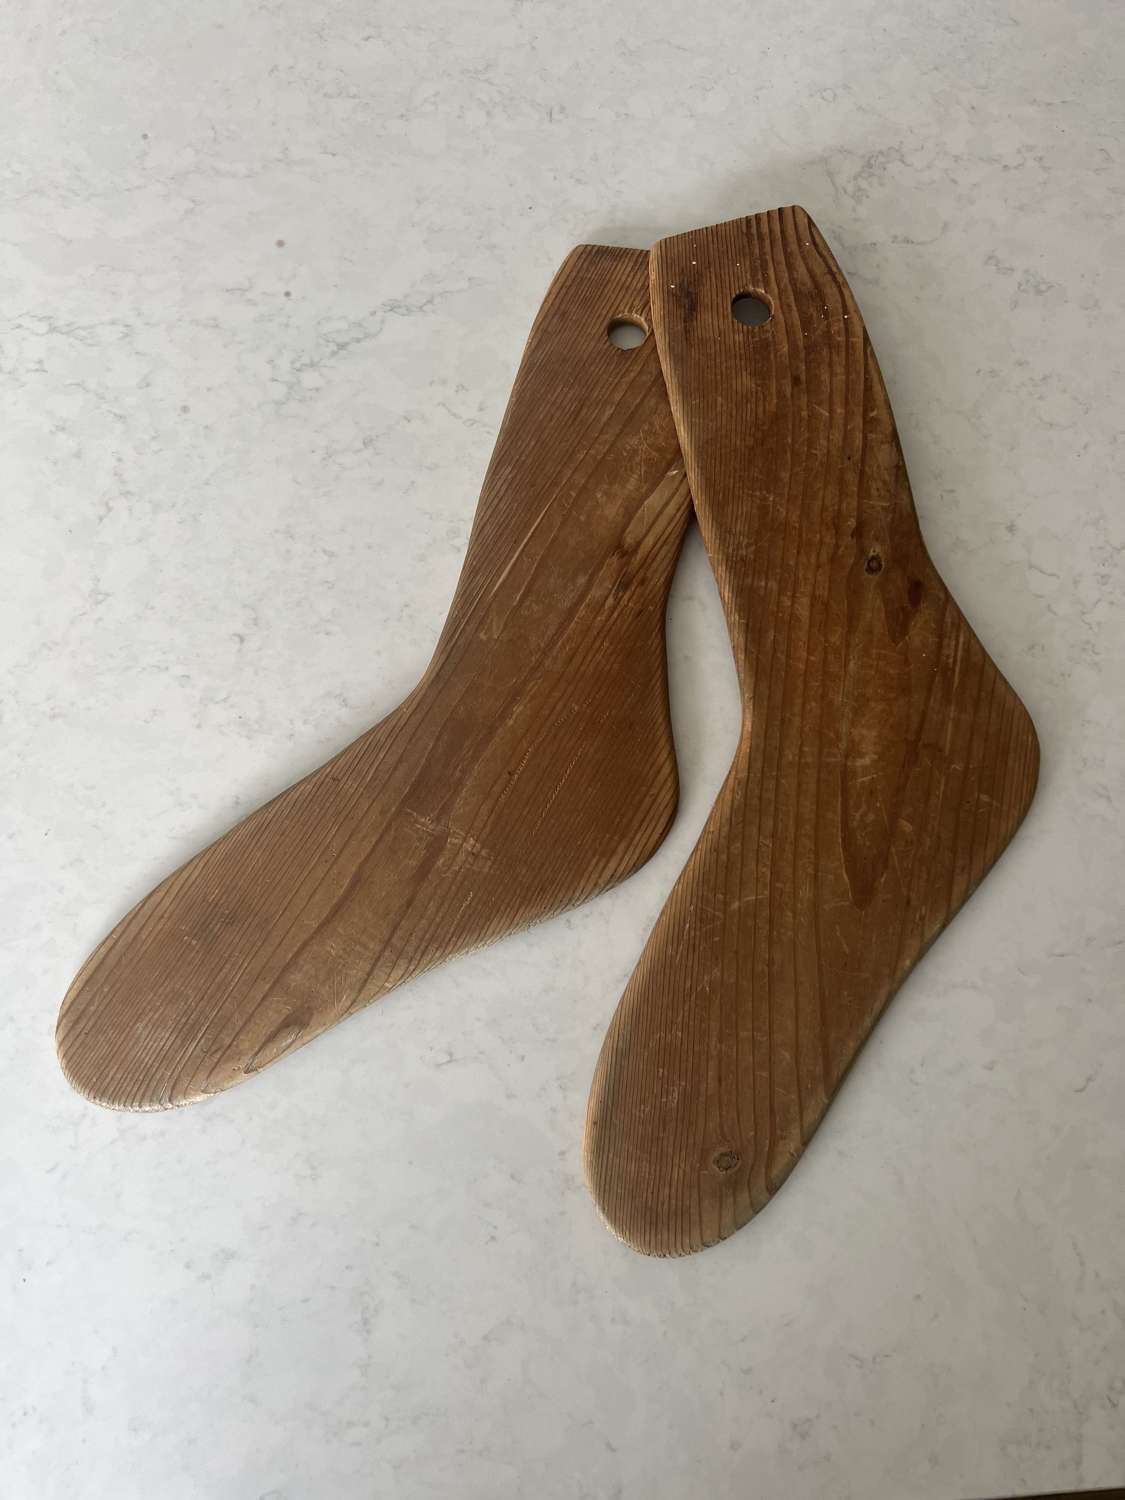 Matched Pair of Late Victorian Solid Pine (Not Ply) Sock Driers